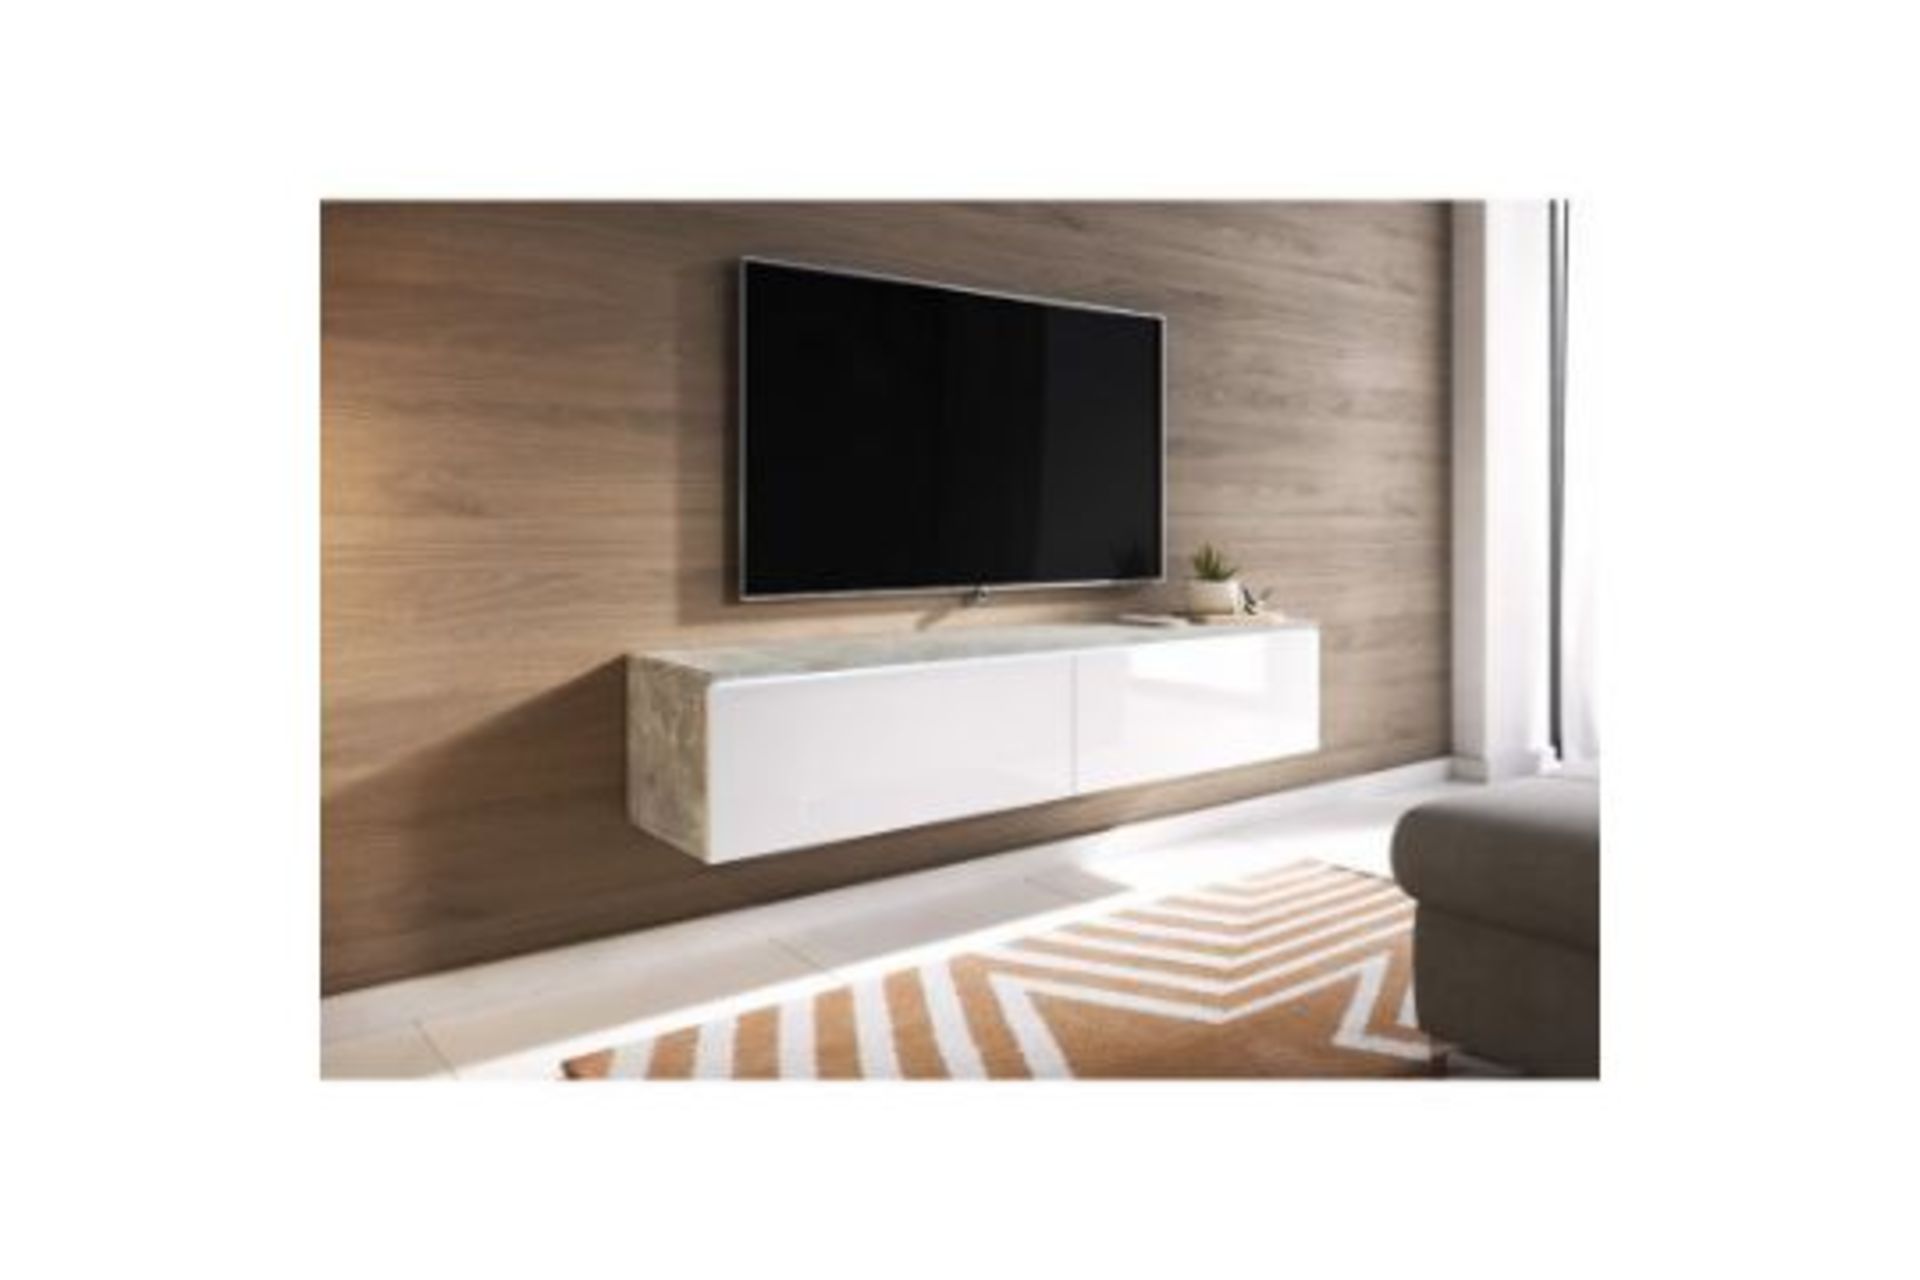 Yoselin TV Stand for TVs up to 60" - RRP £125.99